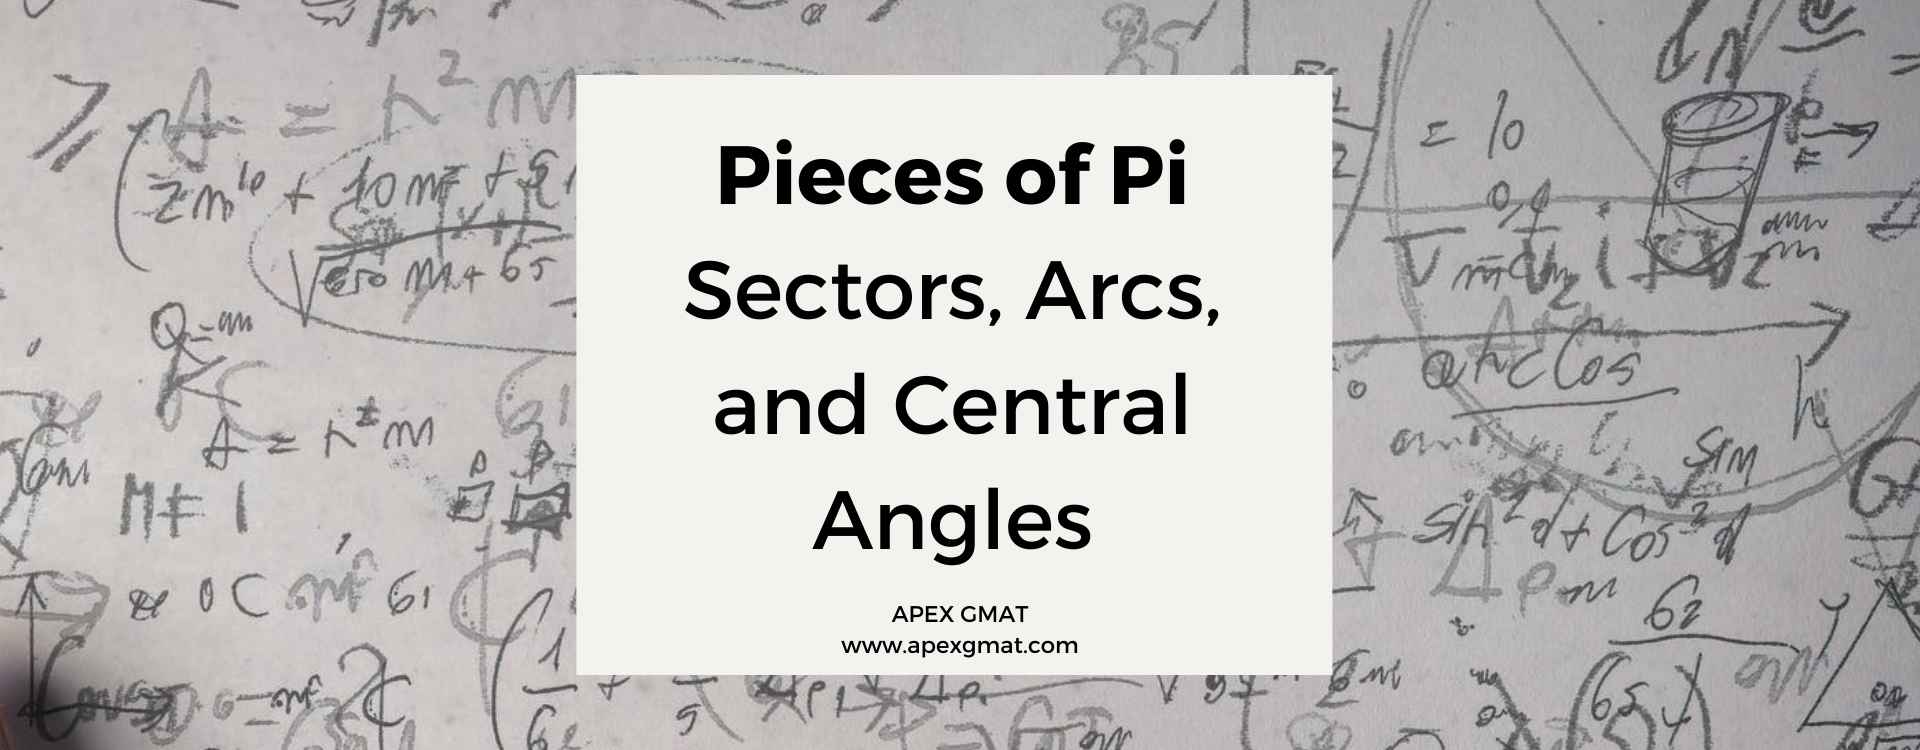 Pieces of Pi: Sectors, Arcs, and Central Angles